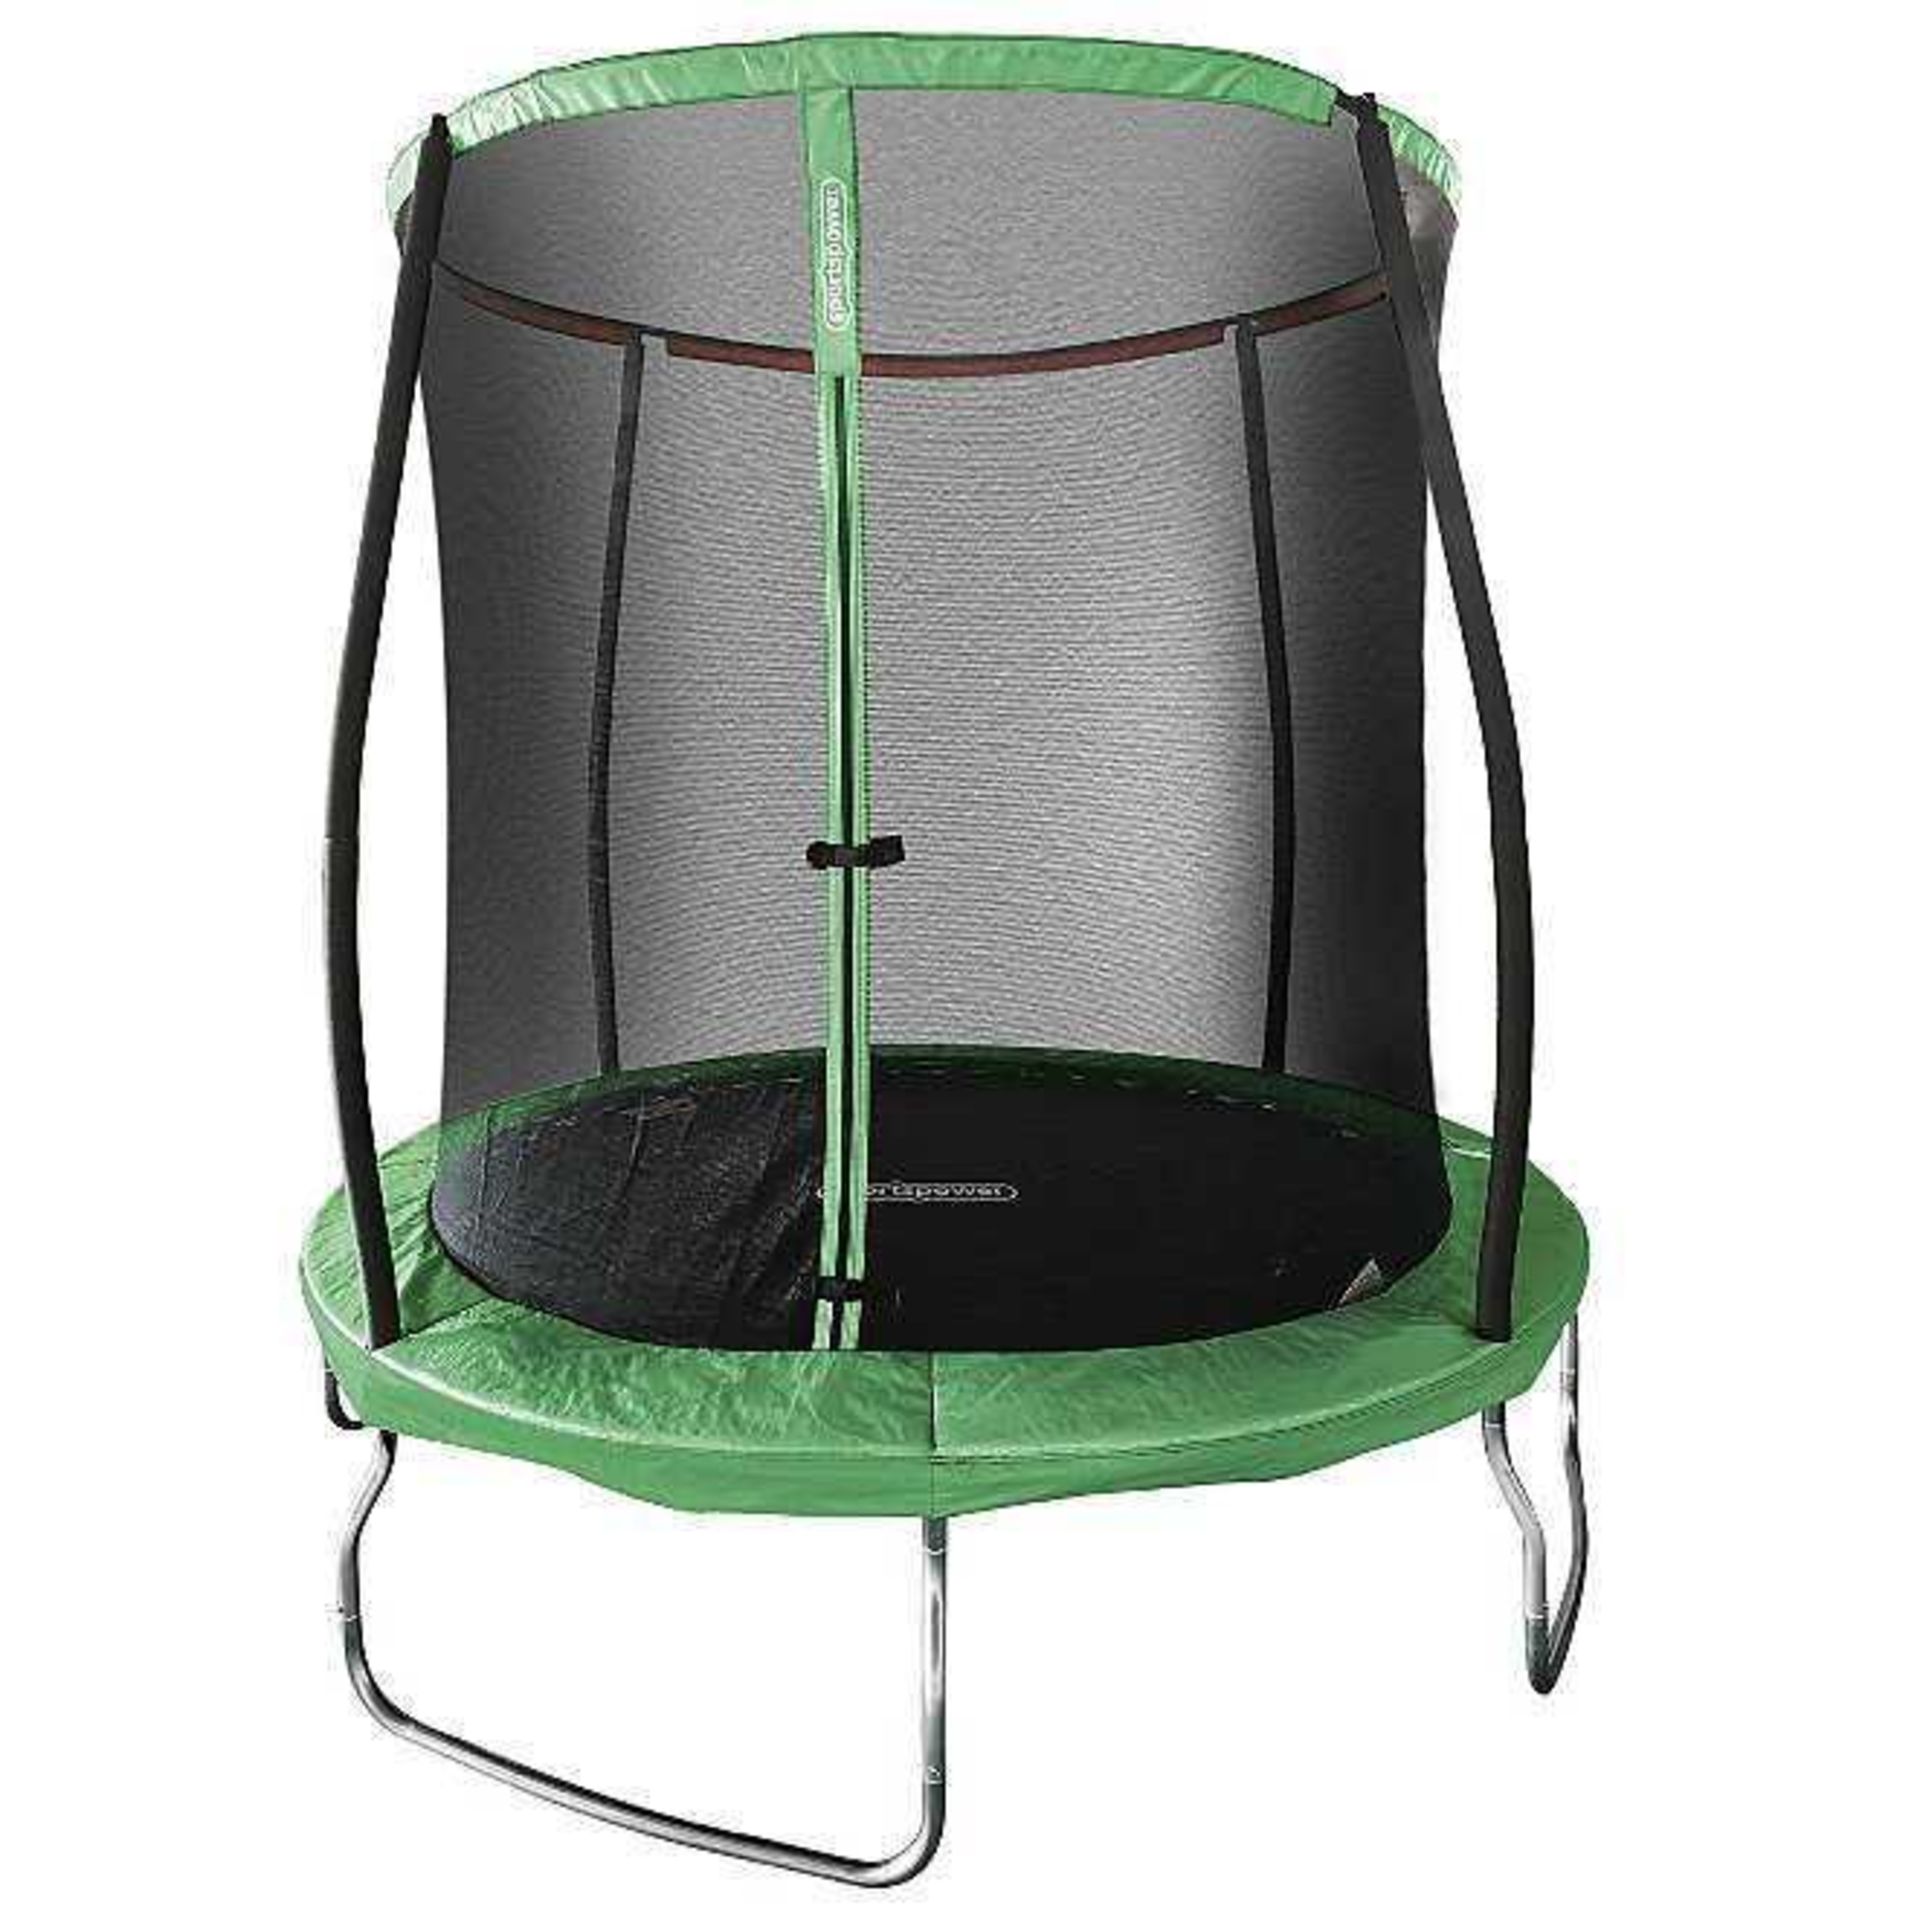 Rrp £150 Boxed Sportpower 8-Ft Trampoline With Enclosure